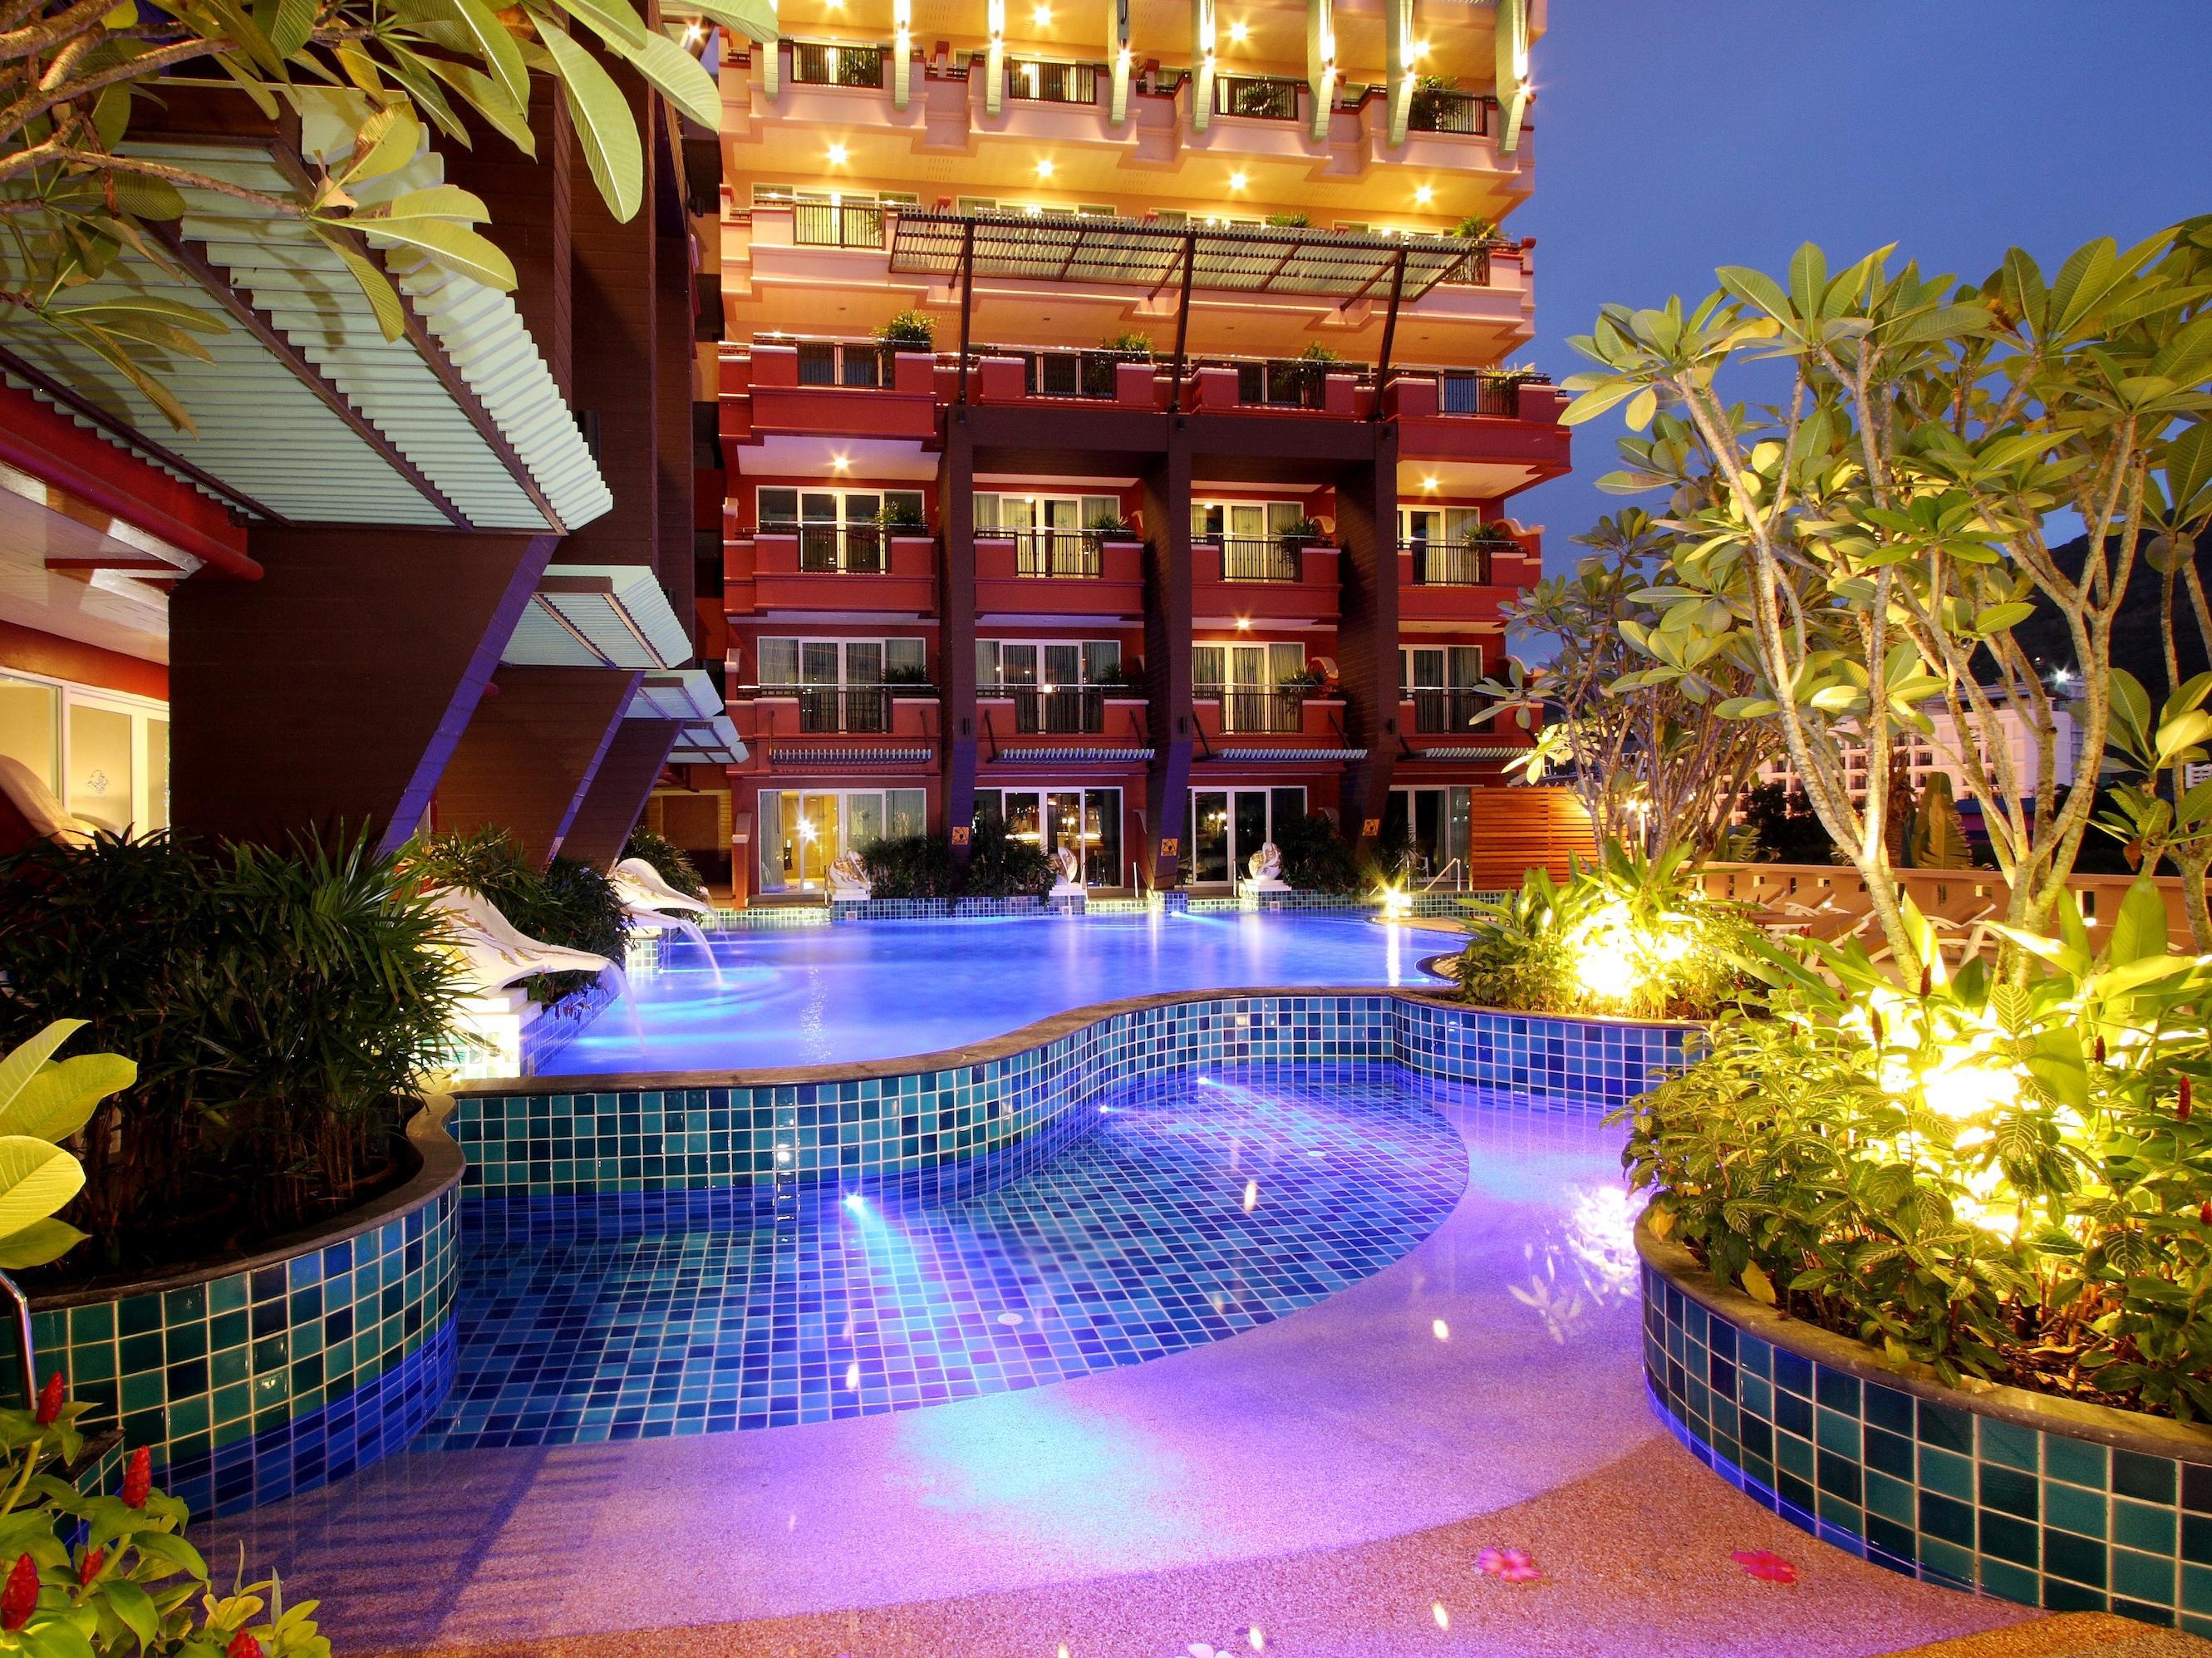 Blue Ocean Resort Thailand FAQ 2016, What facilities are there in Blue Ocean Resort Thailand 2016, What Languages Spoken are Supported in Blue Ocean Resort Thailand 2016, Which payment cards are accepted in Blue Ocean Resort Thailand , Thailand Blue Ocean Resort room facilities and services Q&A 2016, Thailand Blue Ocean Resort online booking services 2016, Thailand Blue Ocean Resort address 2016, Thailand Blue Ocean Resort telephone number 2016,Thailand Blue Ocean Resort map 2016, Thailand Blue Ocean Resort traffic guide 2016, how to go Thailand Blue Ocean Resort, Thailand Blue Ocean Resort booking online 2016, Thailand Blue Ocean Resort room types 2016.